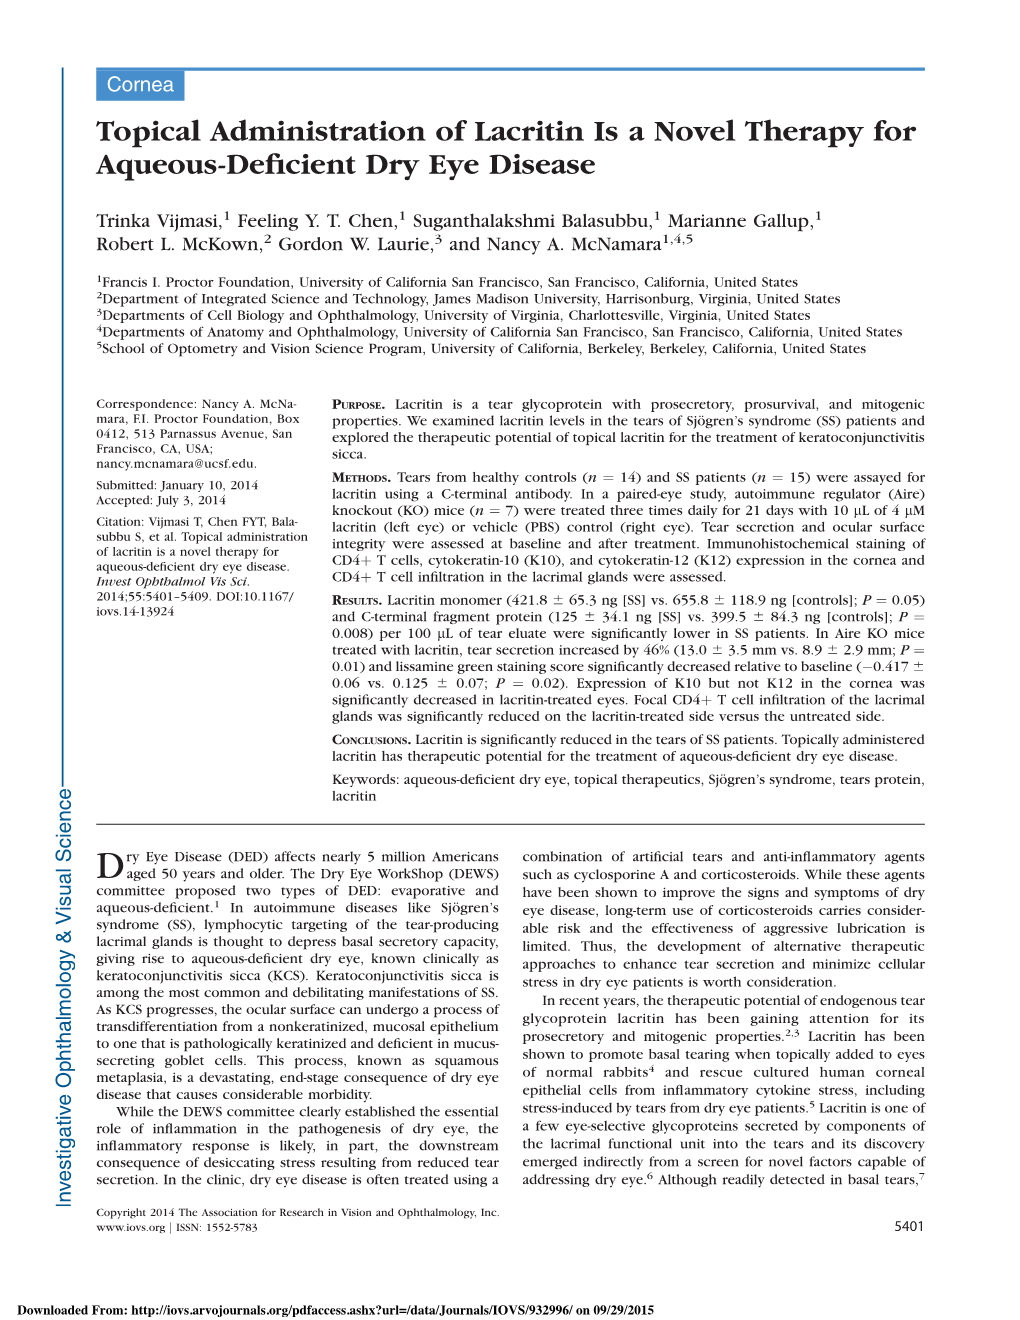 Topical Administration of Lacritin Is a Novel Therapy for Aqueous-Deﬁcient Dry Eye Disease